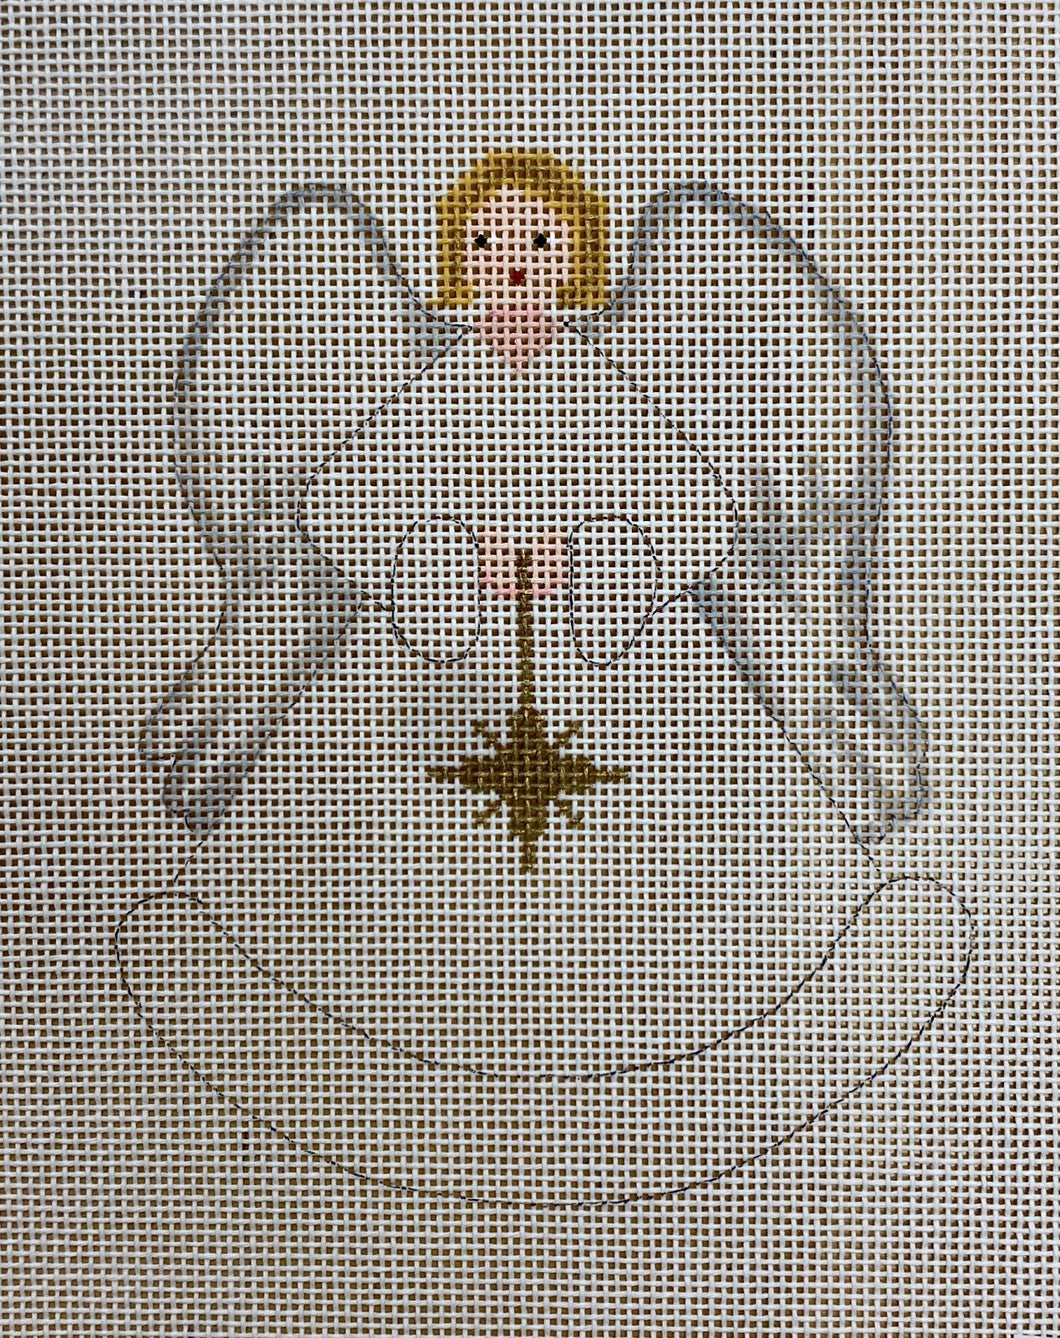 company of angels, star with stitch guide